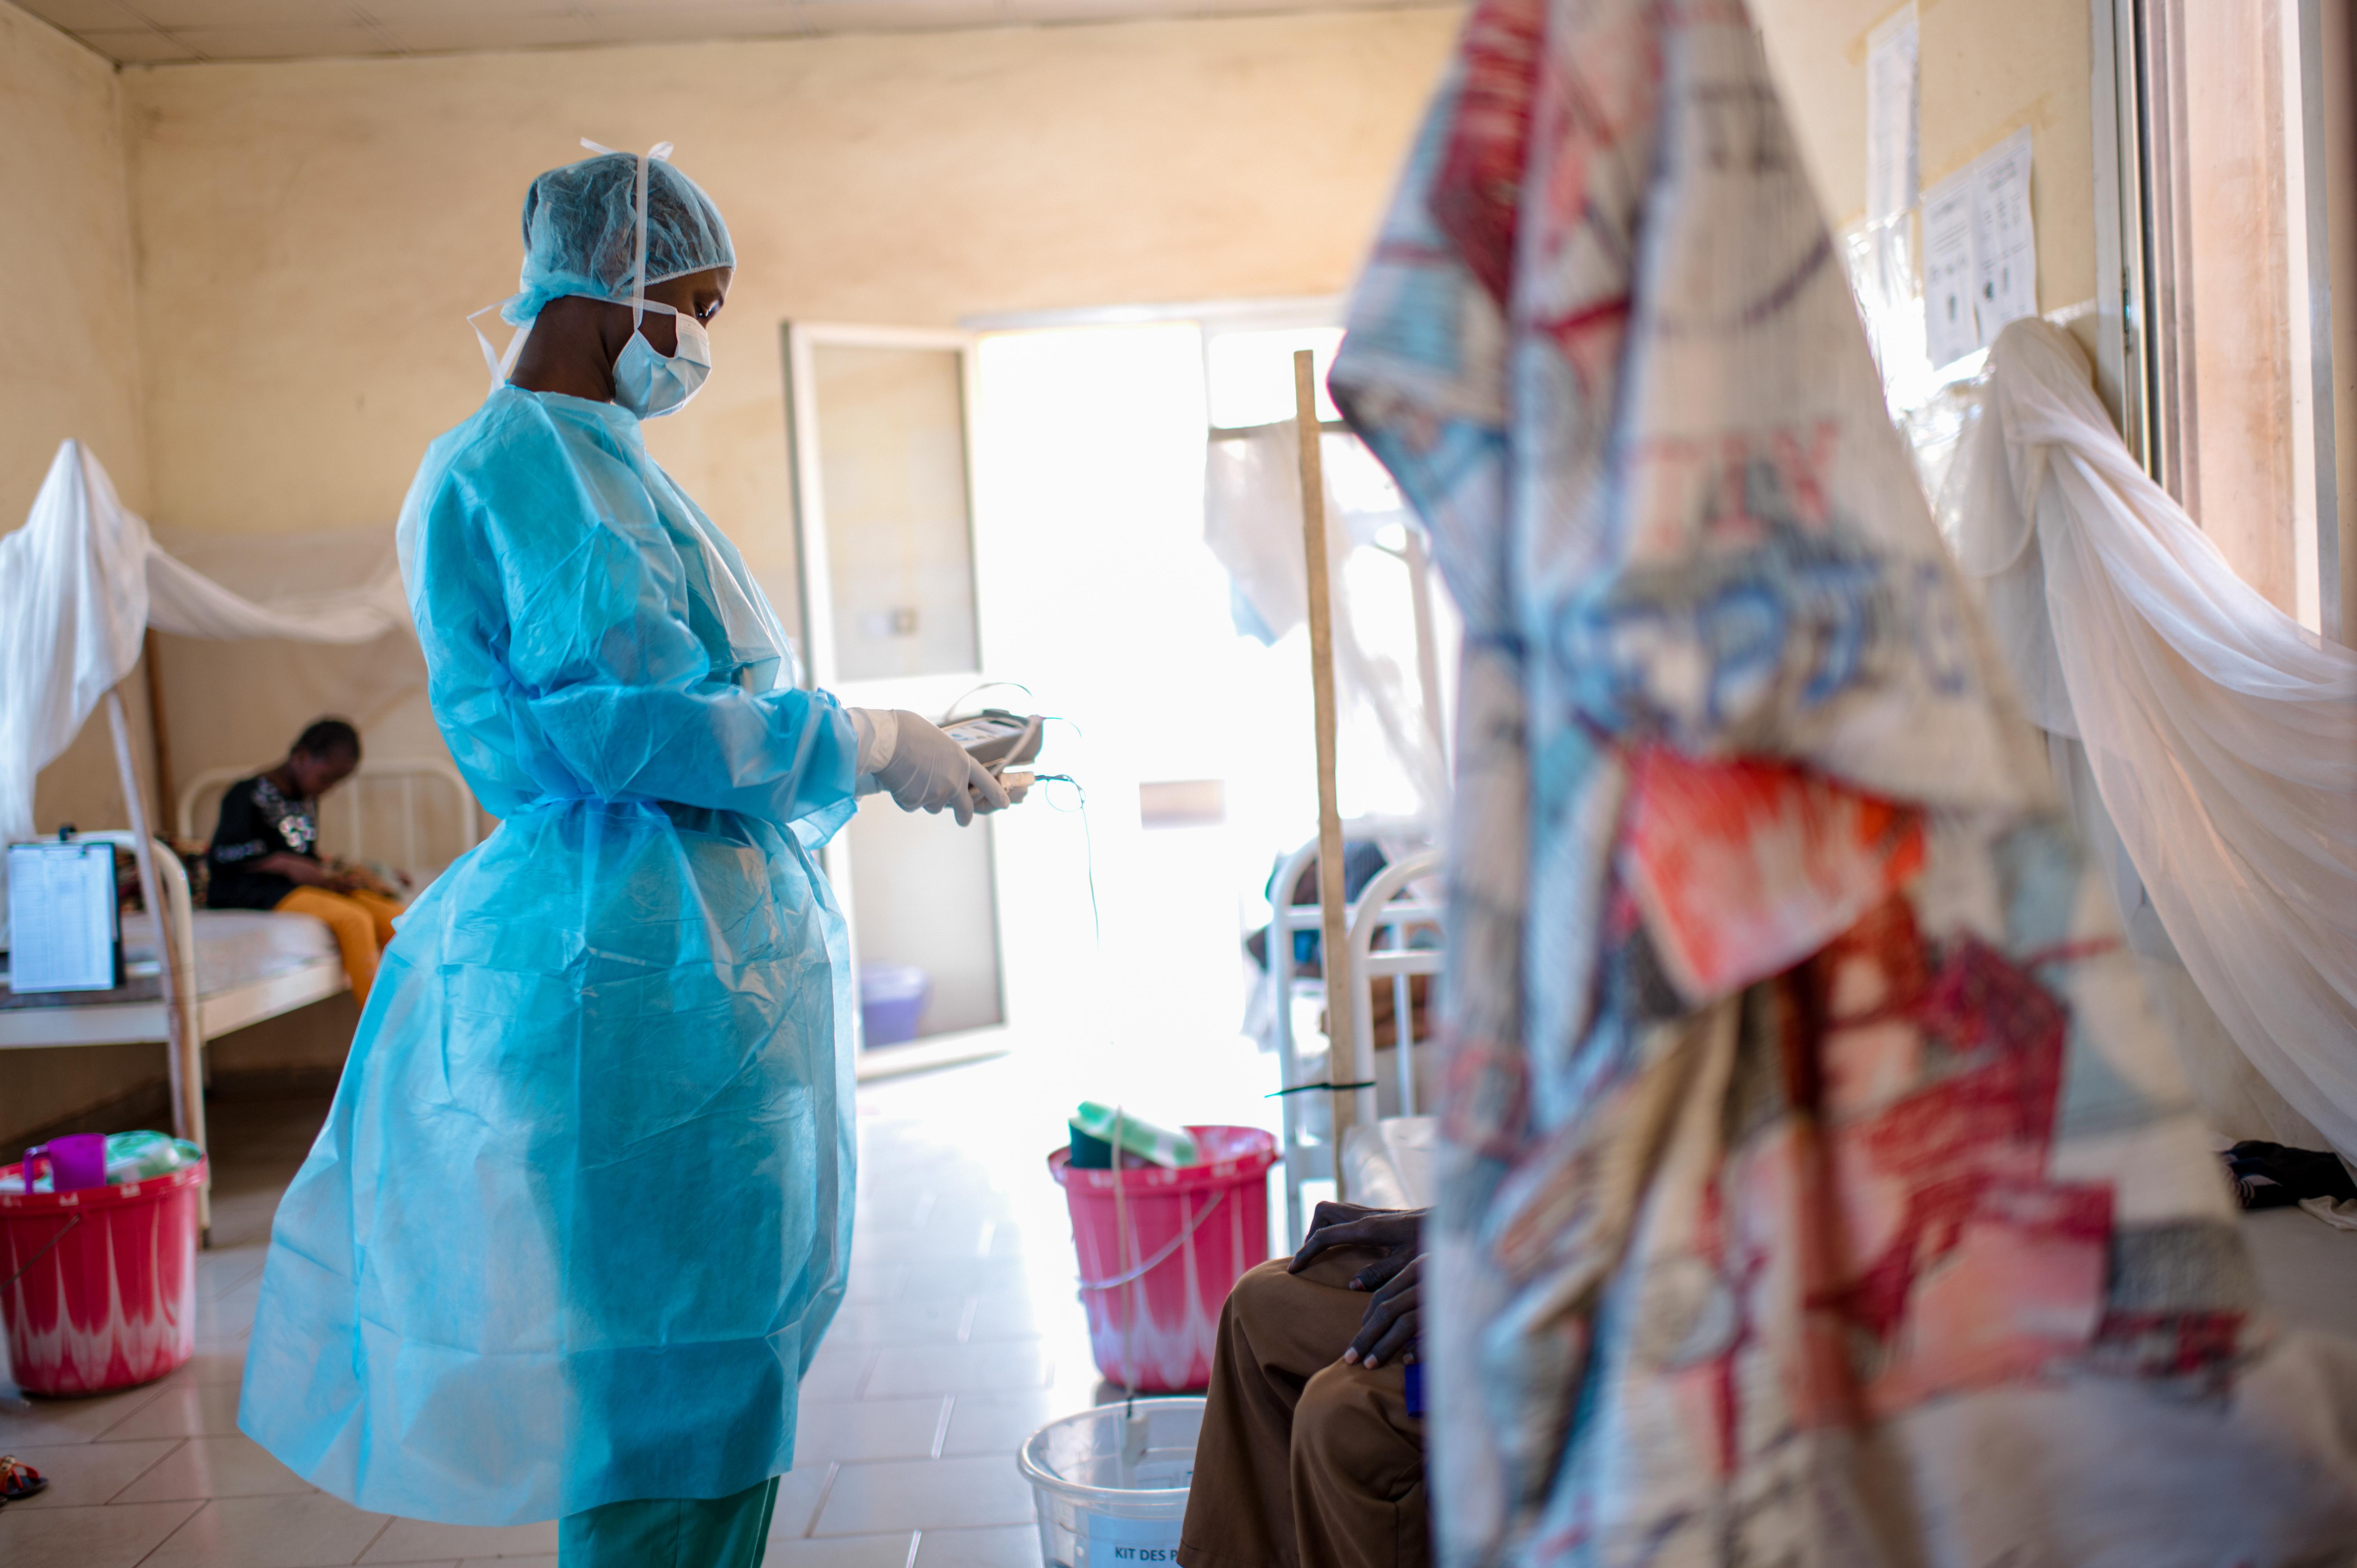 Kankou, a nurse, does a round to check on patients in the morning and to give them their medication against diphtheria at the Centre de Traitement Epidemiologique in Siguiri, Guinea.